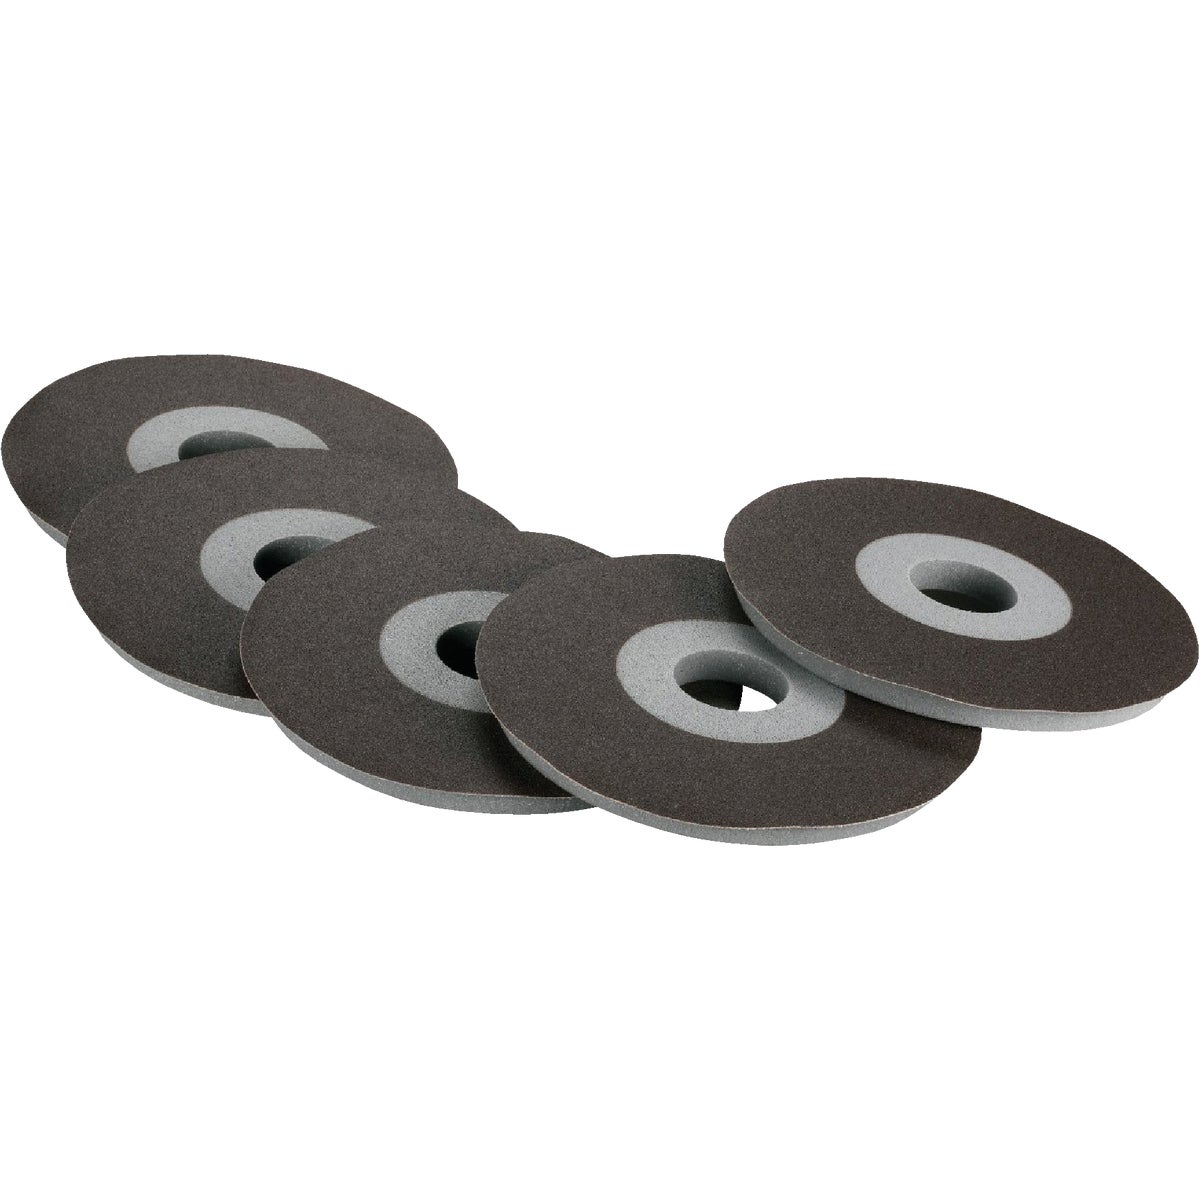 Porter Cable 8- 220 Grit Drywall Sanding Disc (5-Pack)